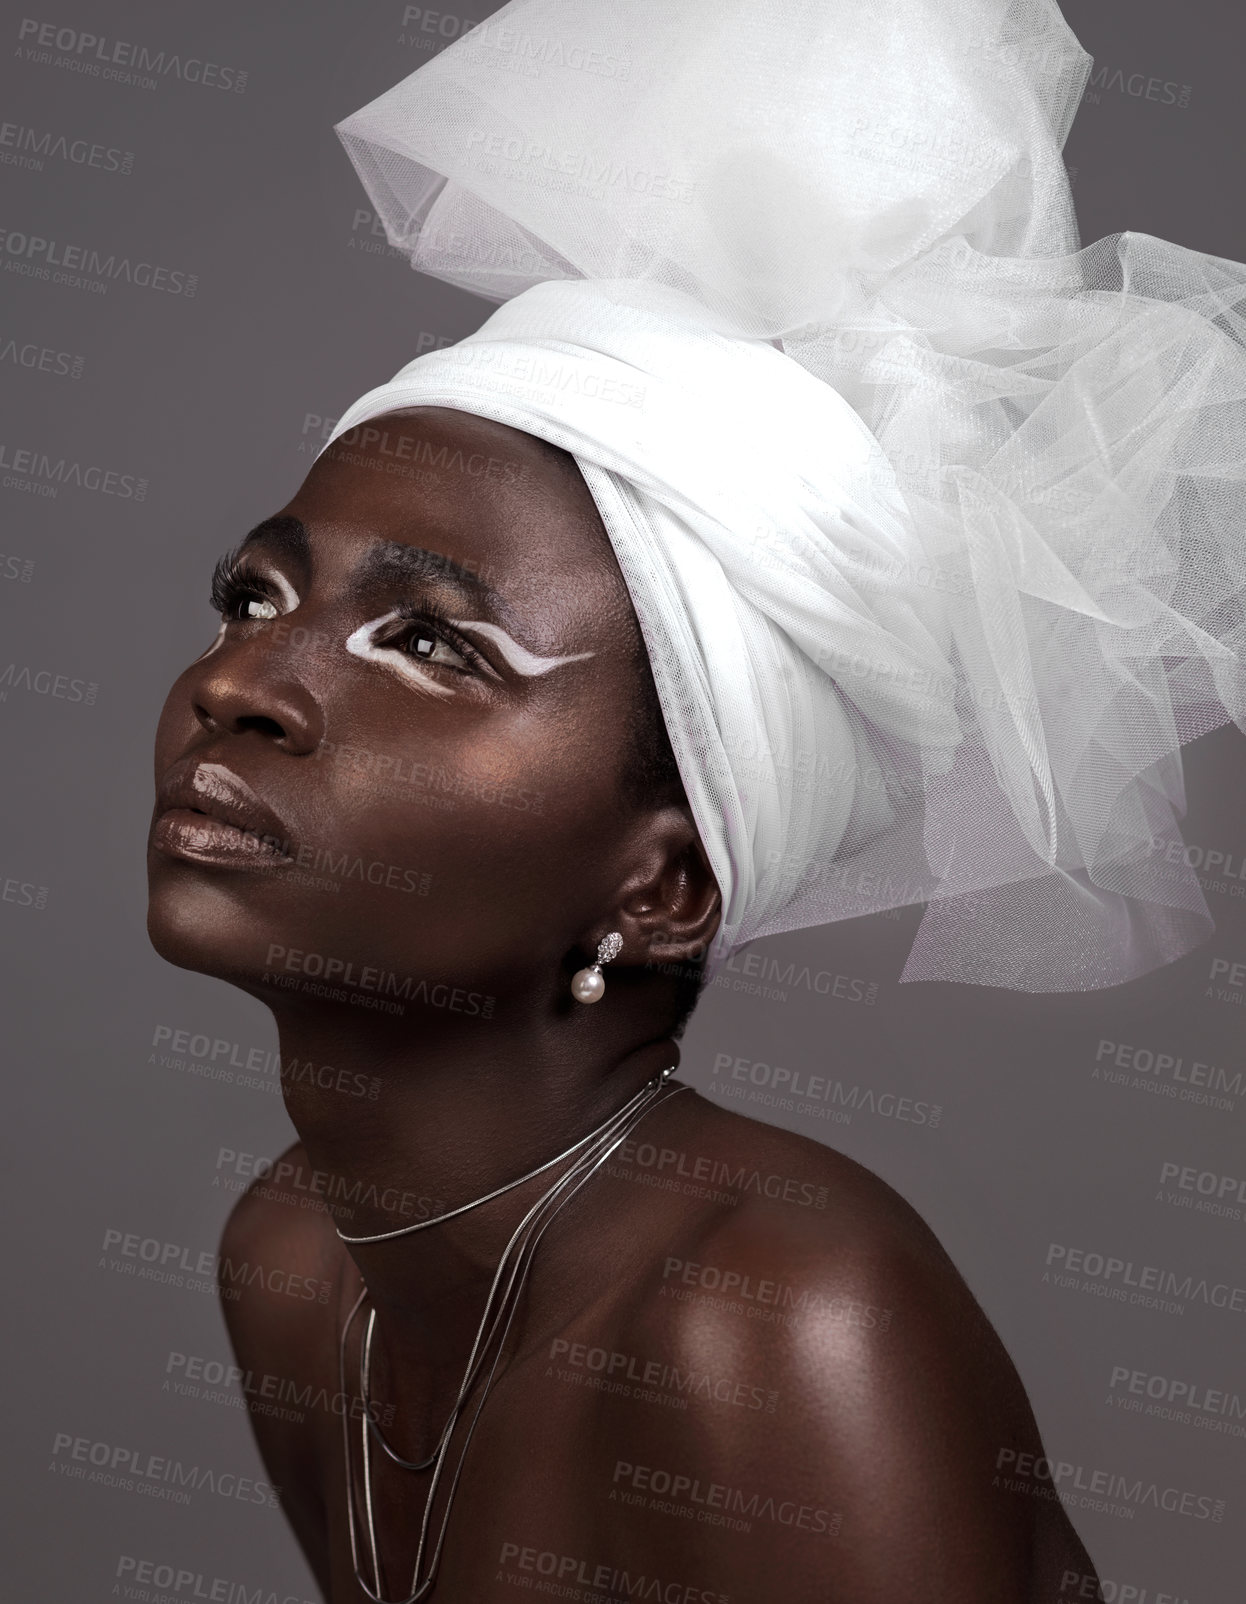 Buy stock photo Studio shot of an attractive young woman posing in traditional African attire against a grey background